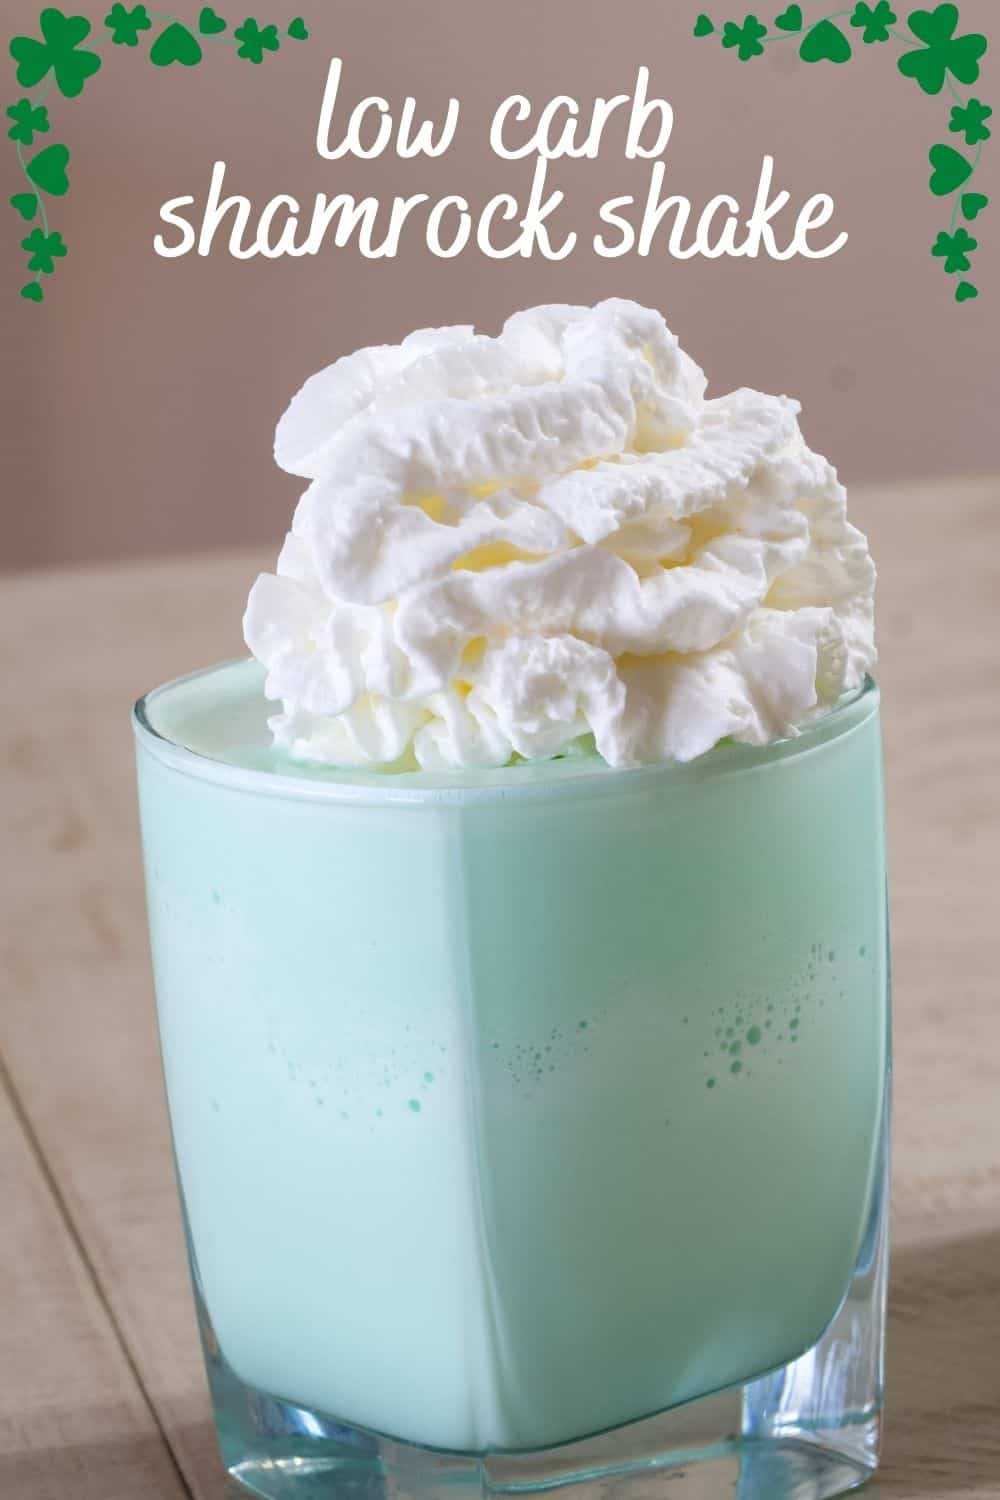 Low Carb Shamrock Shake is our lightened up version of this popular tasty and festive shake. Just 5 ingredients are all you need to make it! #shamrockshake #copycatrecipe #lowcarbrecipe #lowcarbdessert